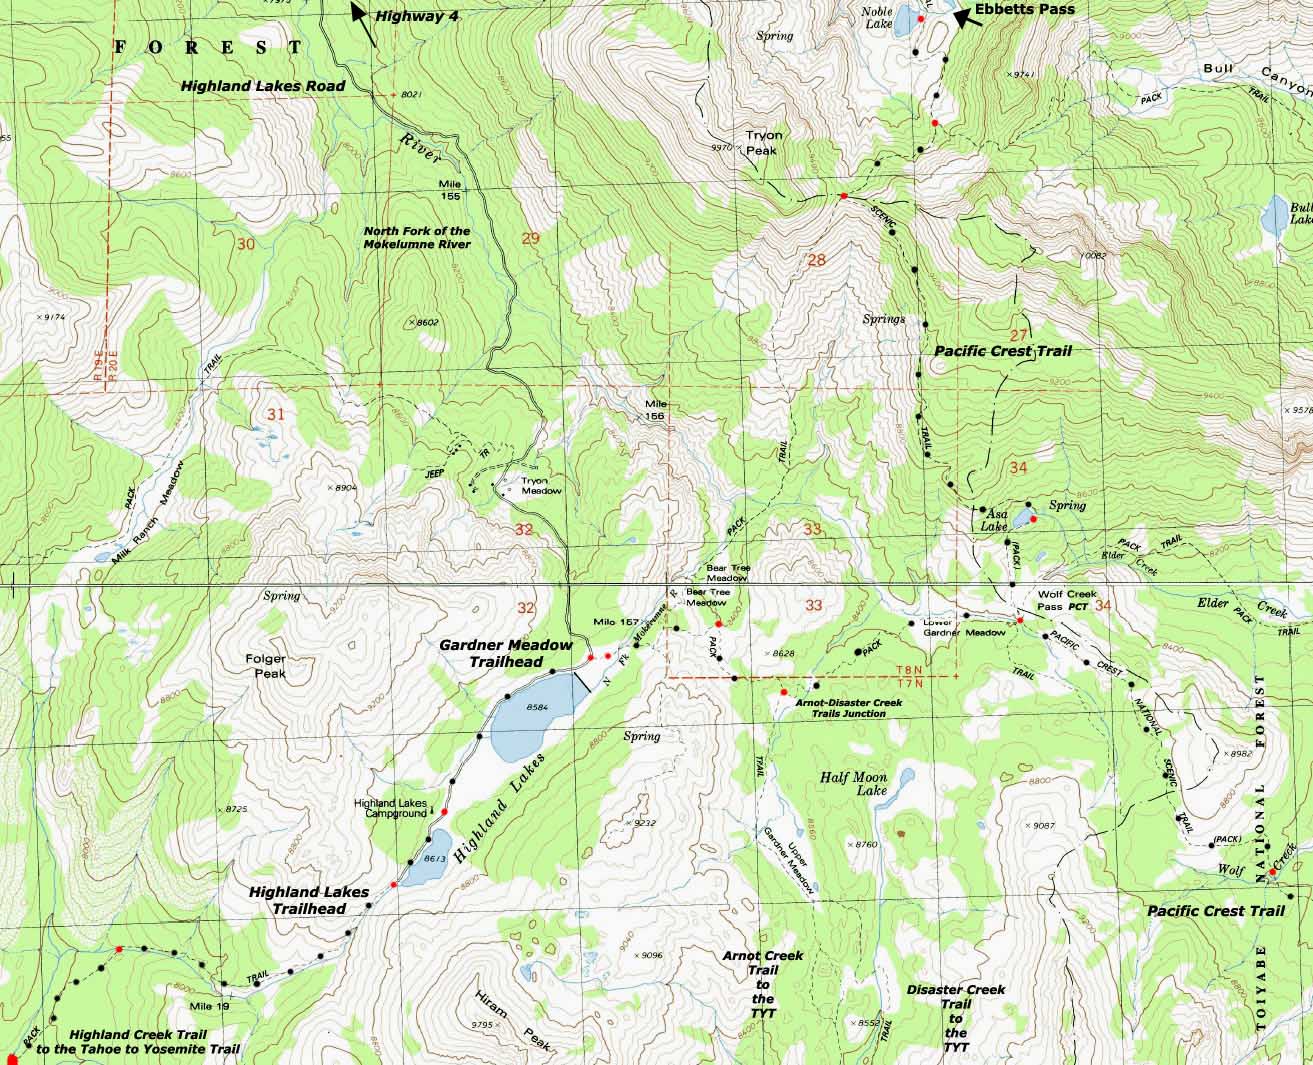 Tahoe to Yosemite Trail route linked to the Pacific Crest Trail at Wolf Creek Pass via Highland Creek, Highland Lakes, and Gardner Meadow.